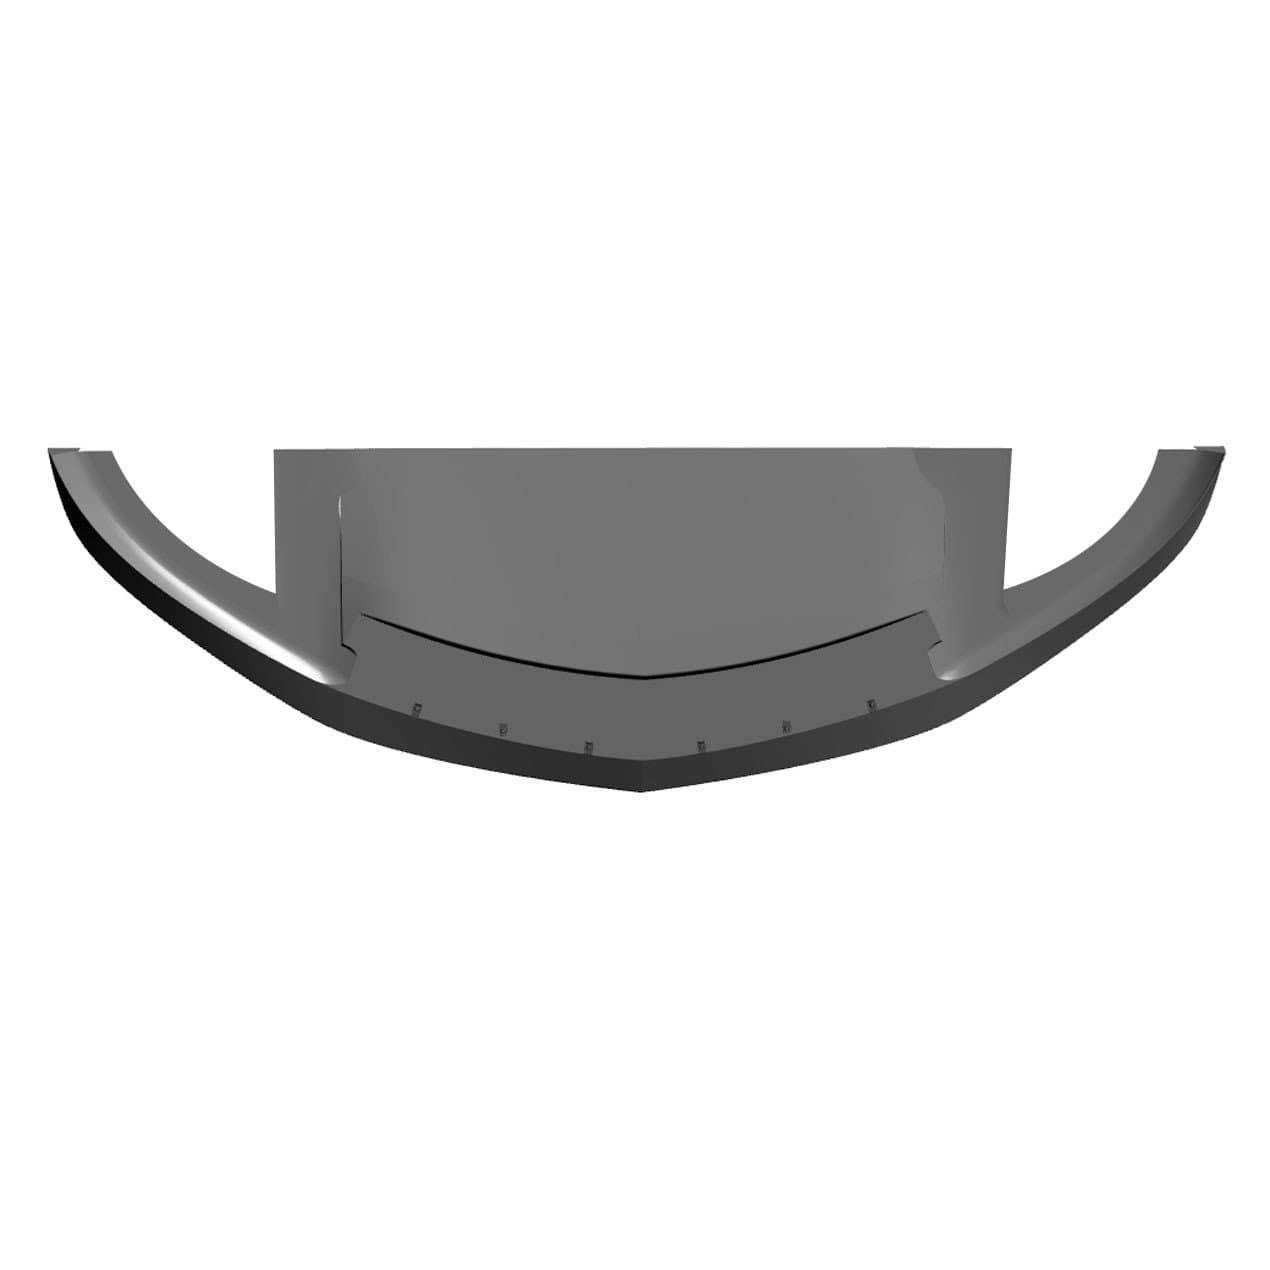 ACS Composite Front Splitter for Cadillac ATS [44-4-001]PRM - Aerodynamic and fuel-efficient upgrade for your vehicle